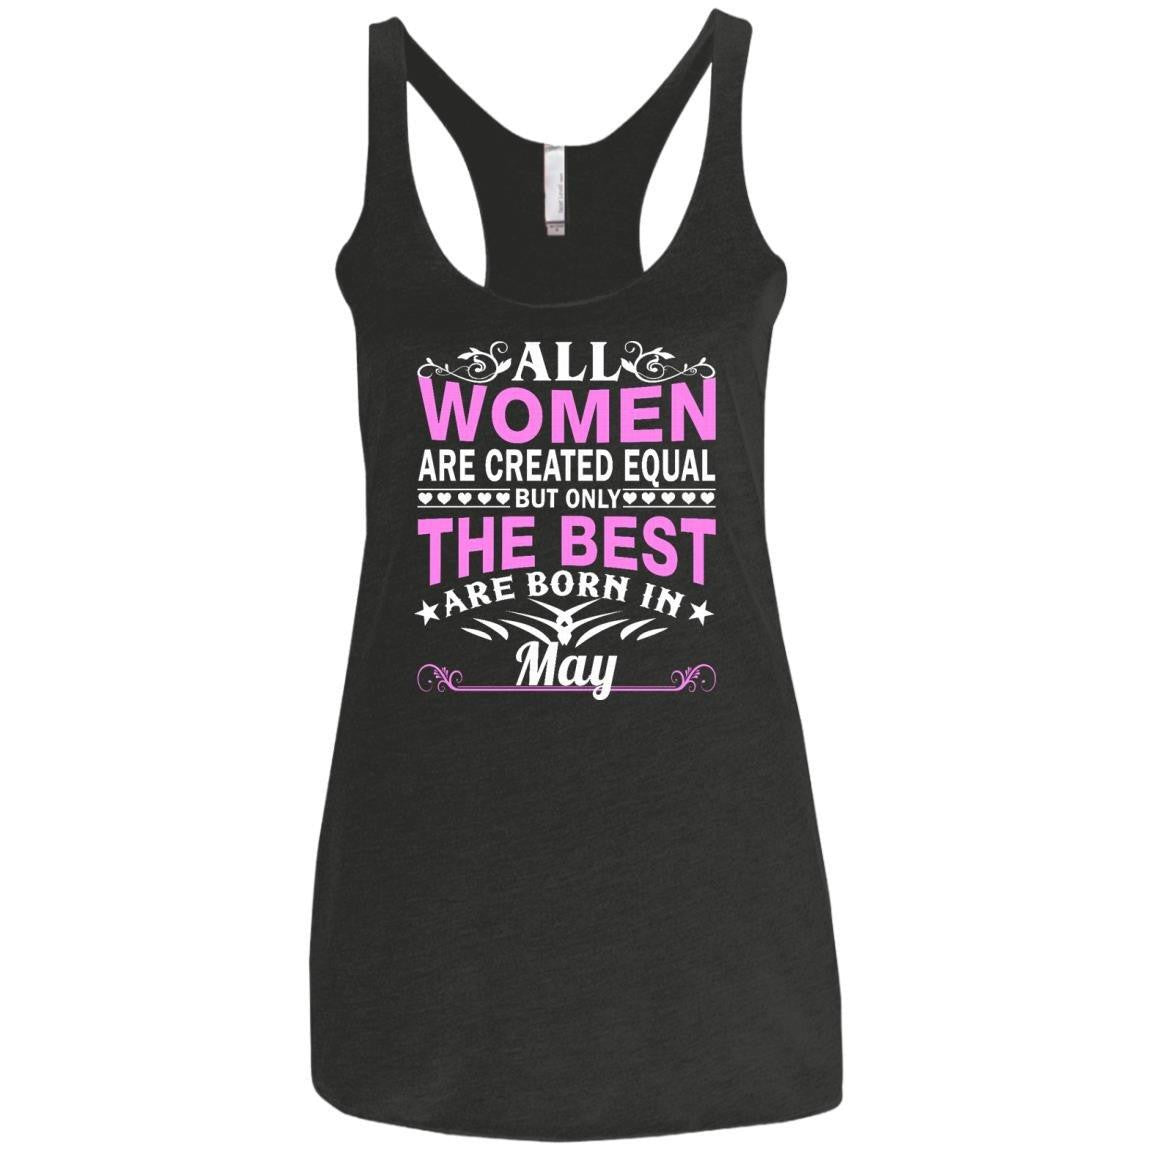 All Women Are Created Equal But Only The Best Are Born In May shirt, t